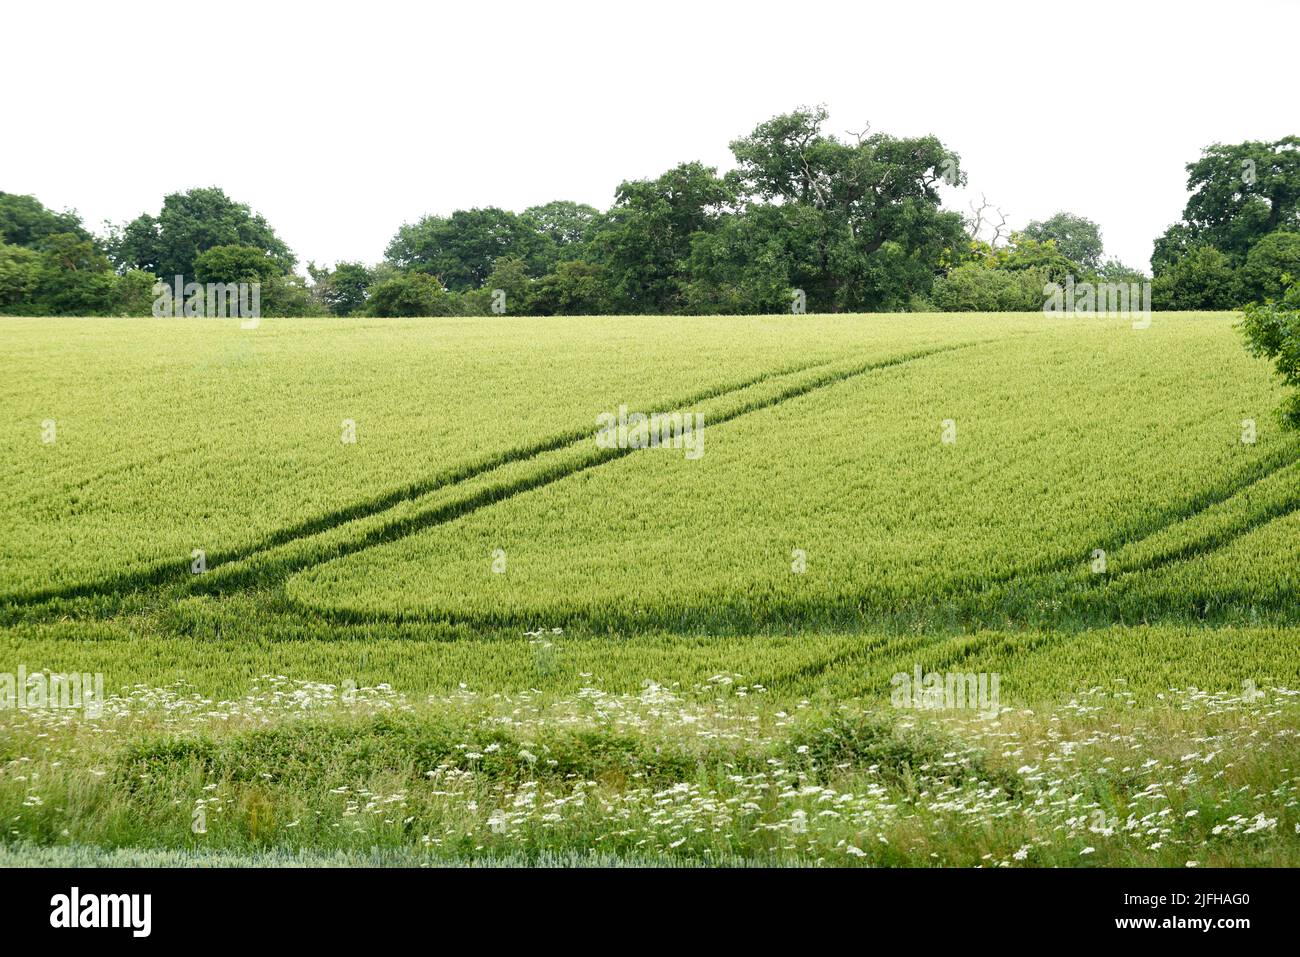 Agricultural farm field with crops growing Stock Photo